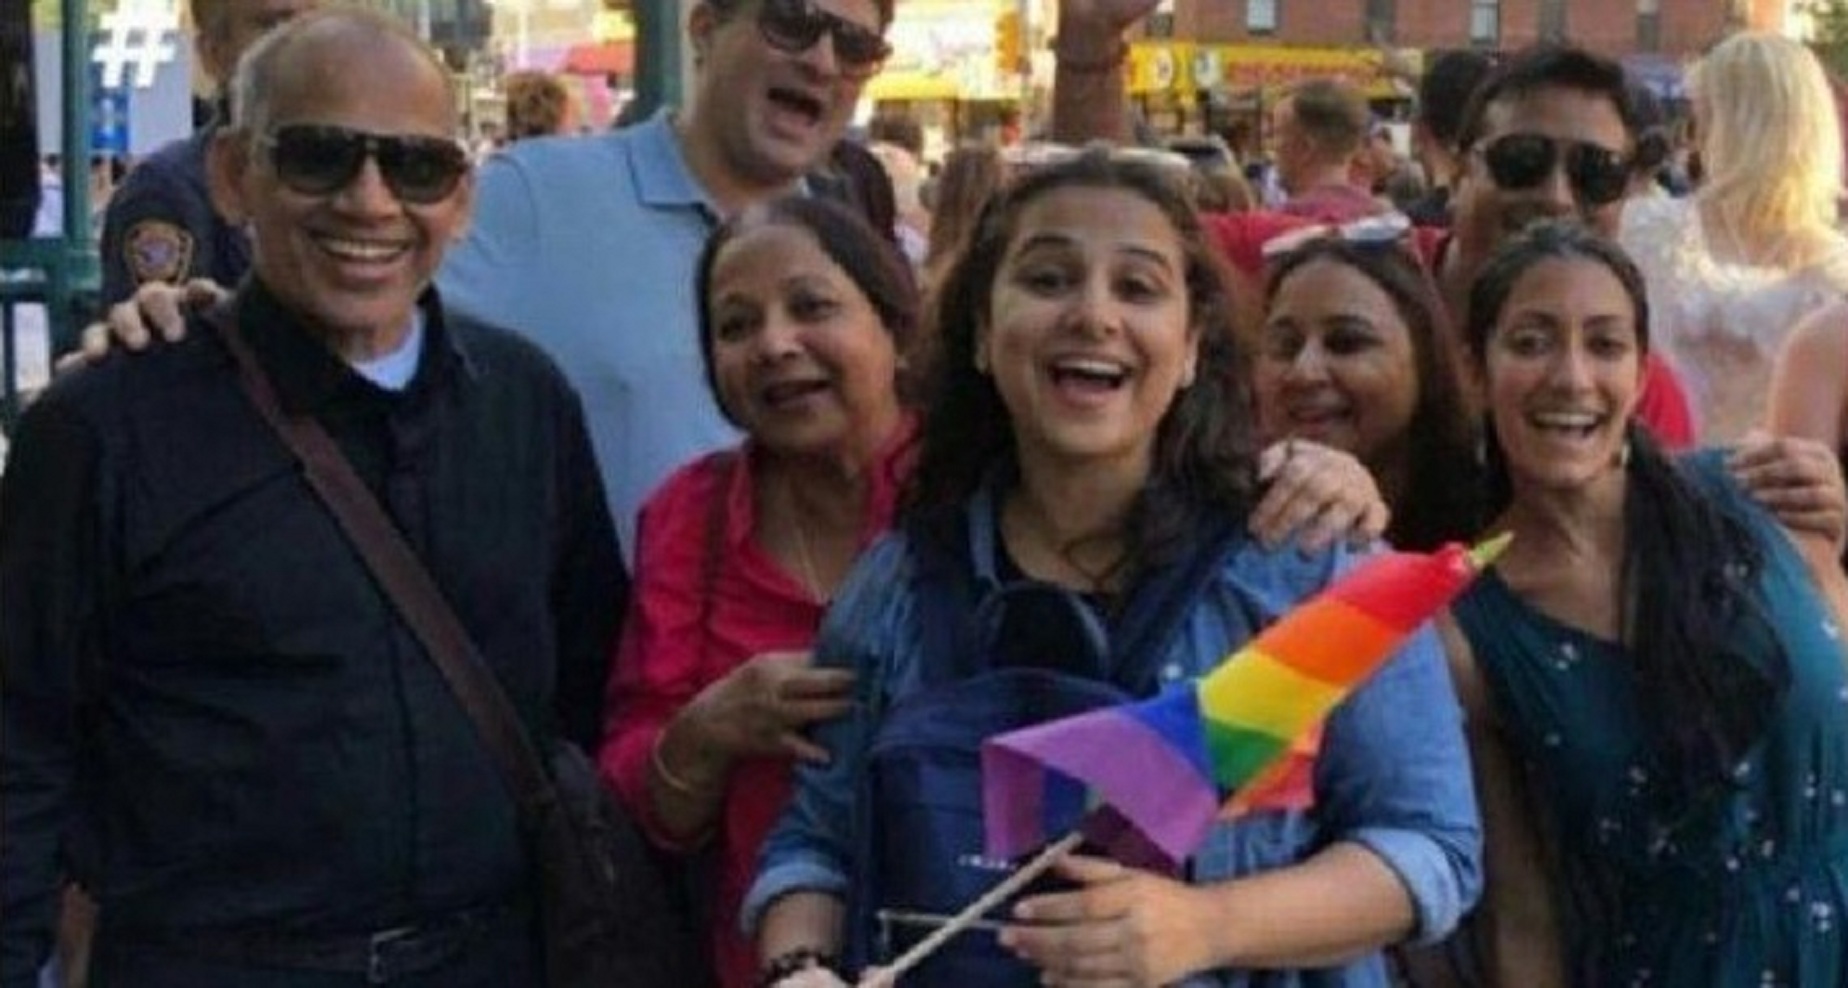 Vidya Balan Takes Part in NYC Pride Parade, But What About LGBTQ Rights at Home?